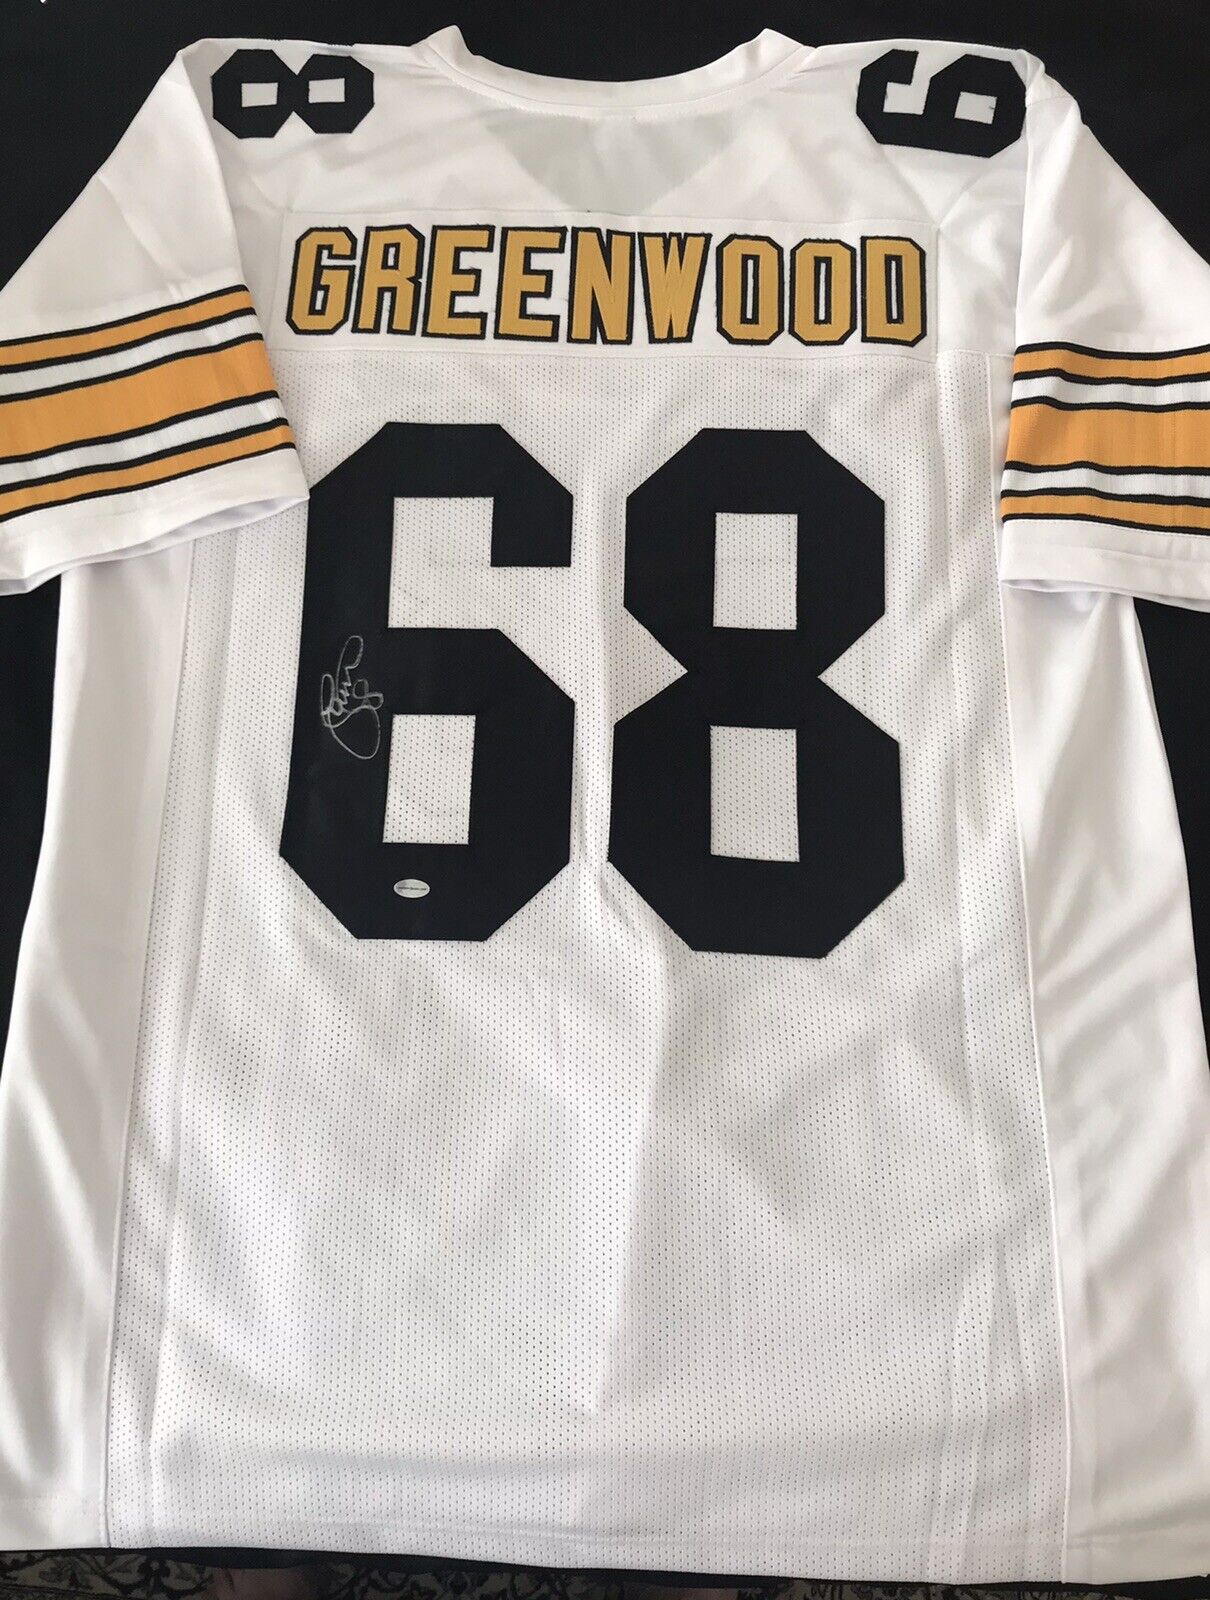 lc greenwood jersey